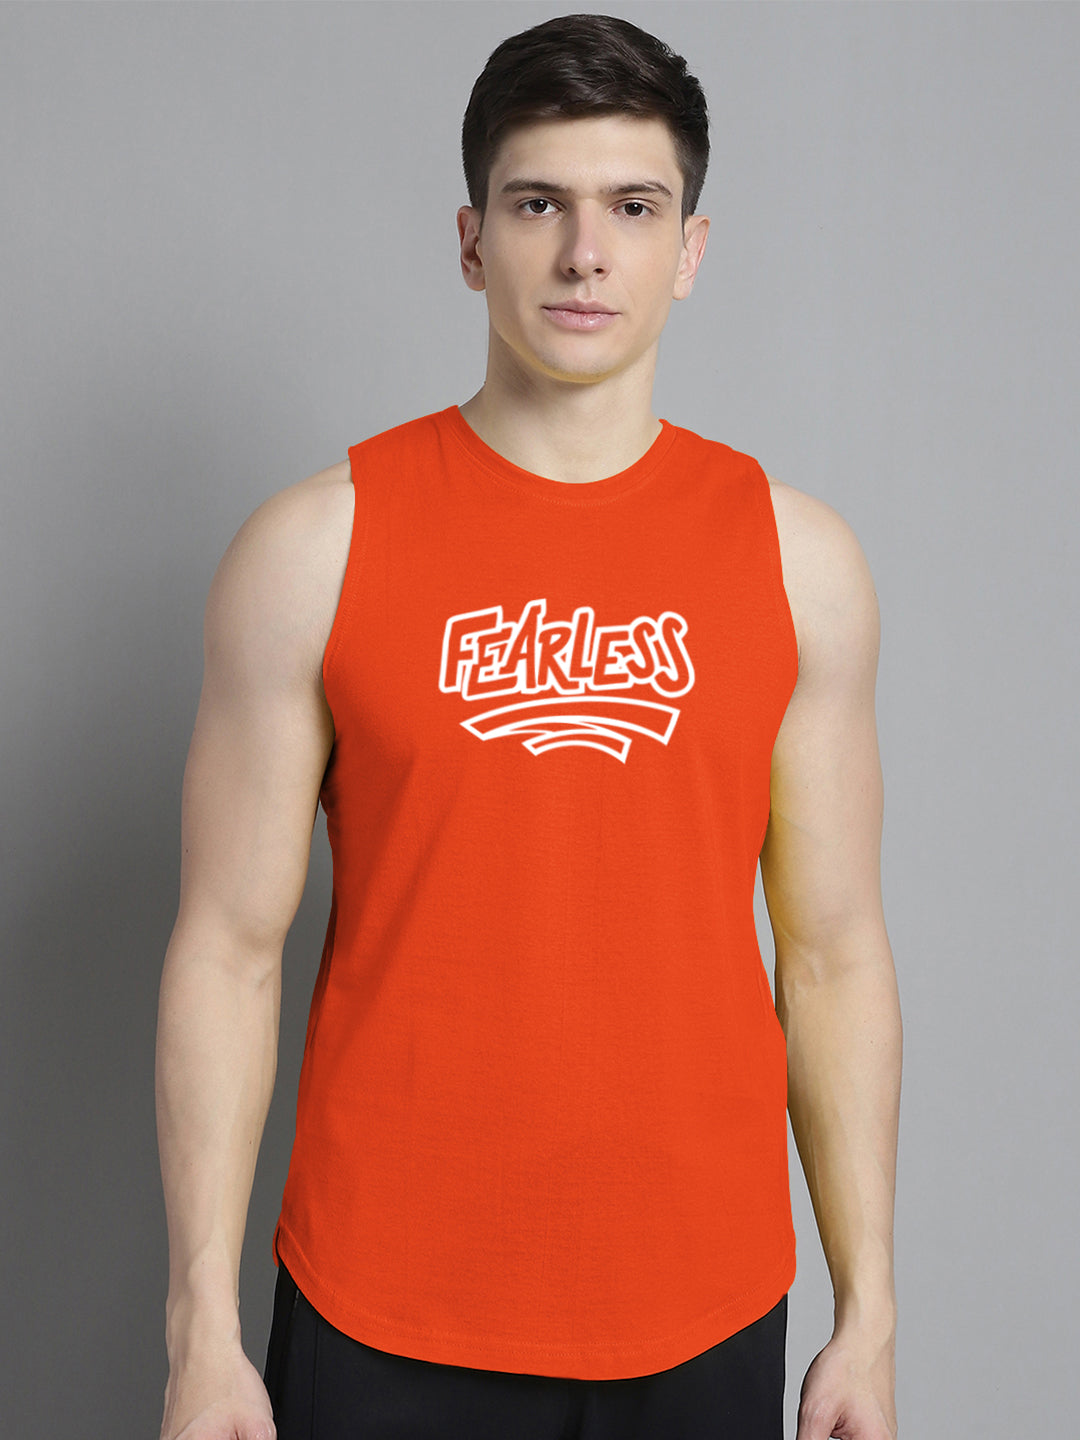 Fbar Fearless printed Pure Cotton Training Vest